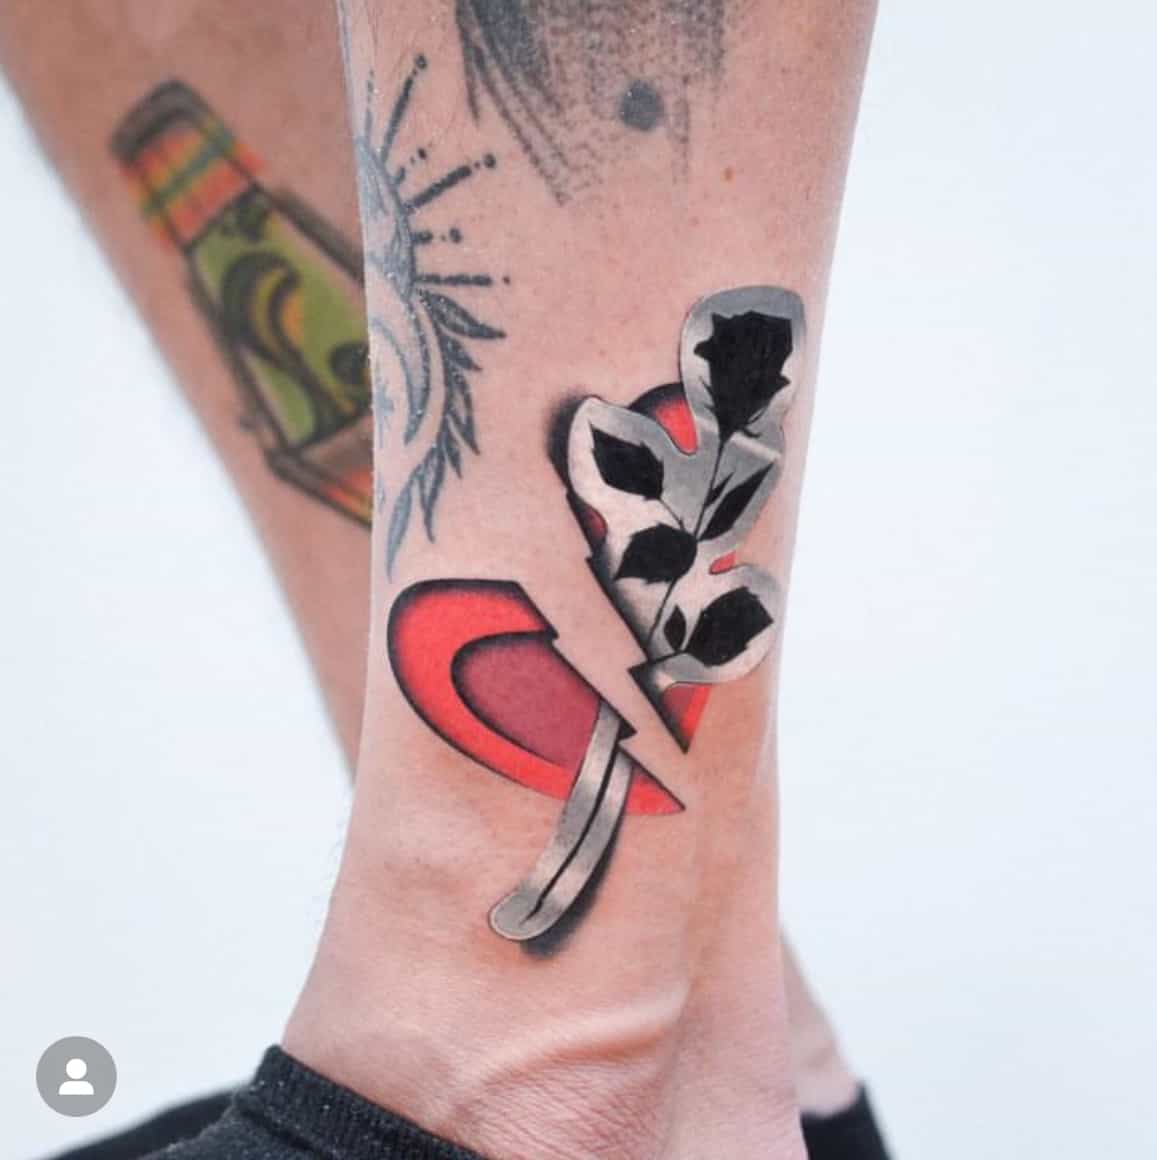 21 Broken Heart Tattoos to Fall in Love With